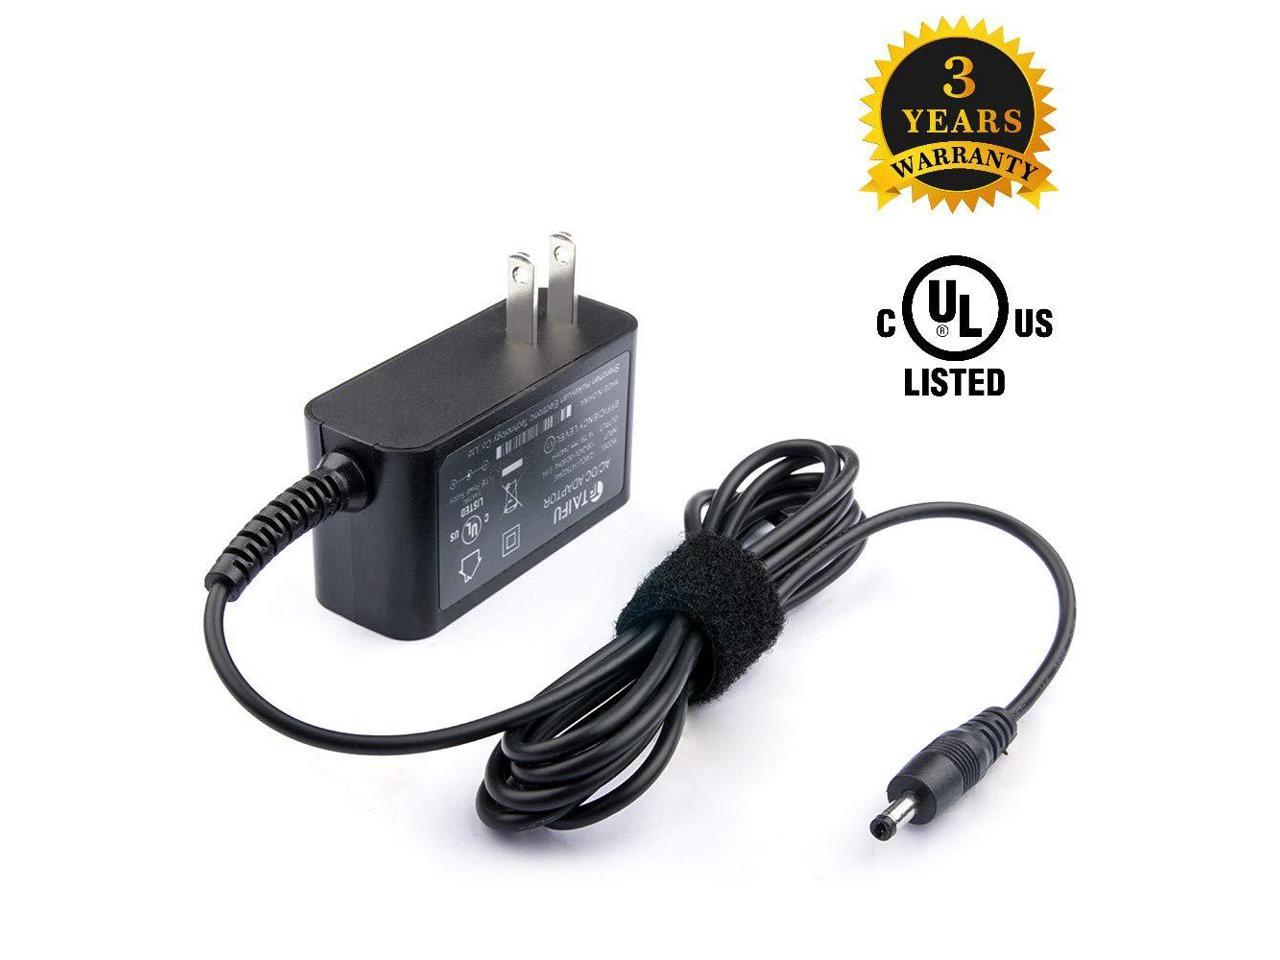 5V 1A/2.1A Dual USB Port Power Charger for JAWBONE BIG JAMBOX KLIPSCH GIG 